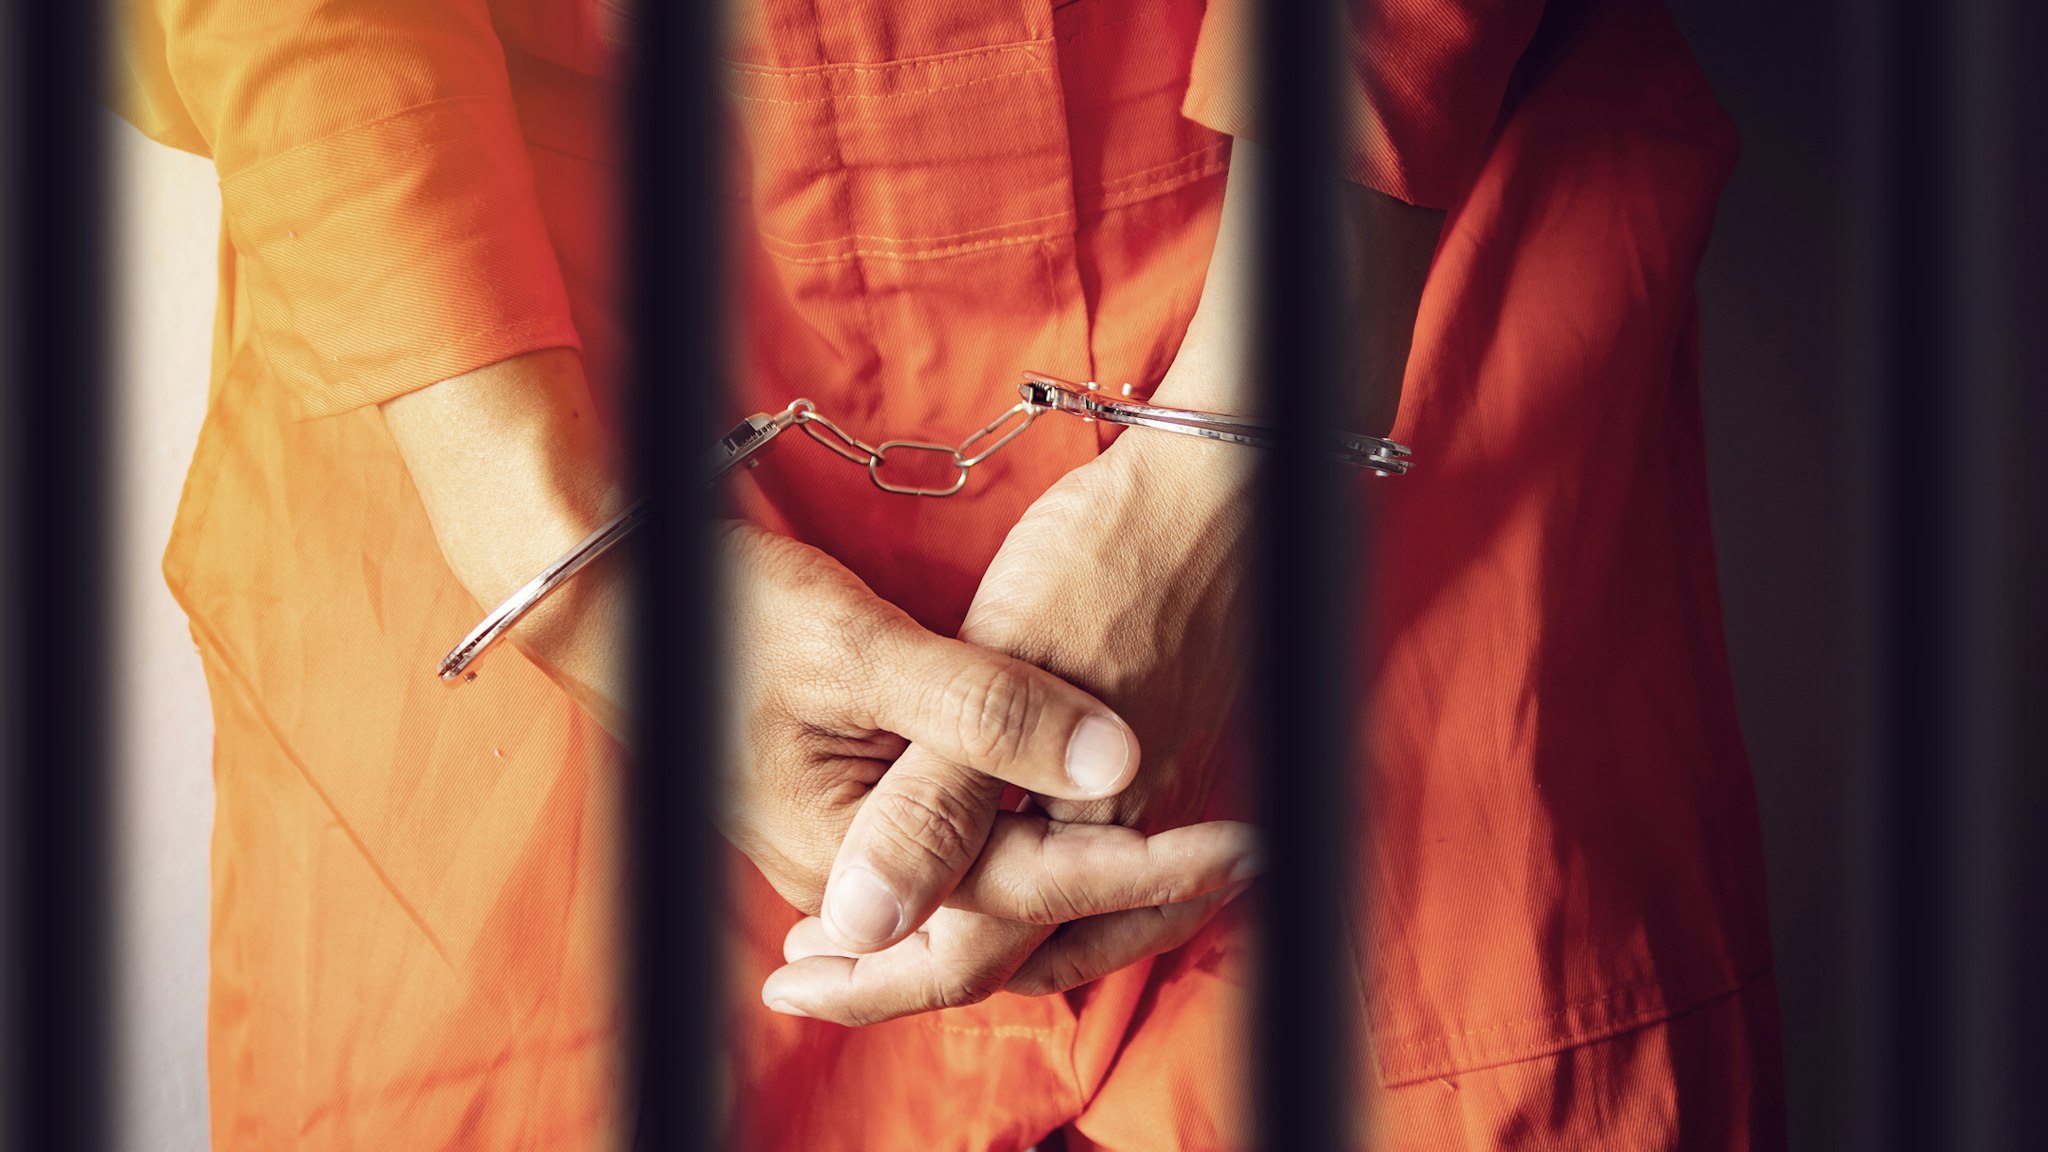 Midsection Of Prisoner With Handcuffs In Prison - stock photo